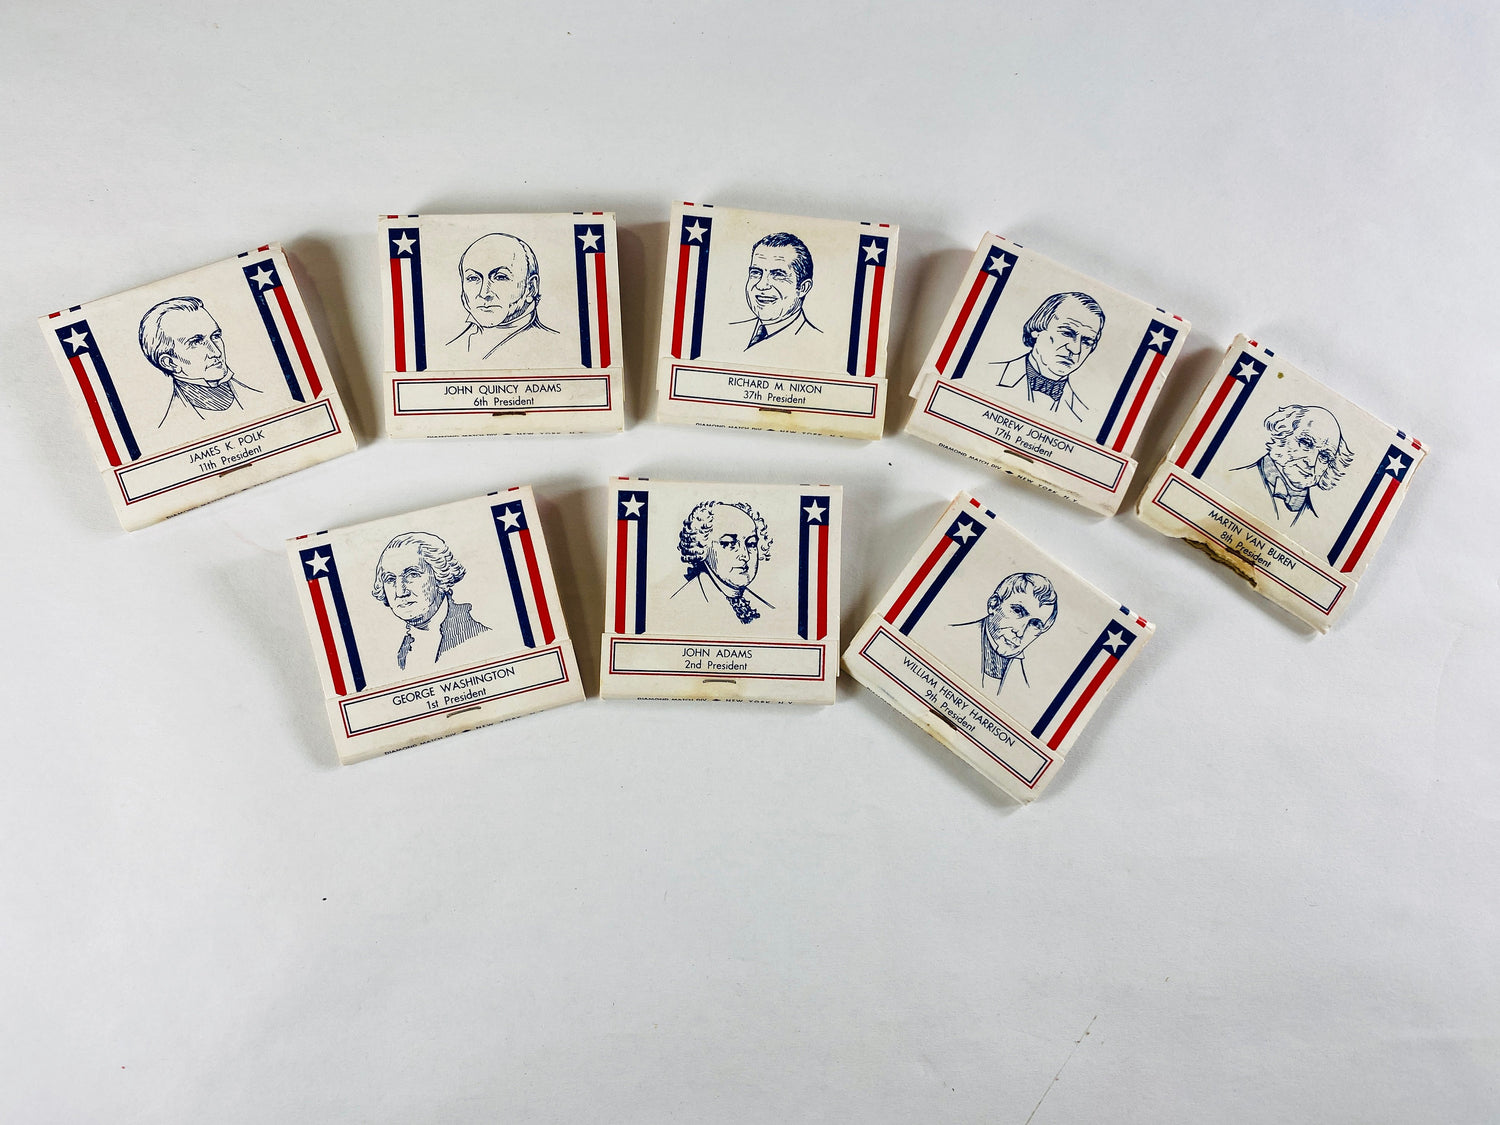 1960 Vintage United States Presidents Matchbox Matches made in the US Petite cardboard home office decor Lincoln Grant Coolidge LBJ Taft